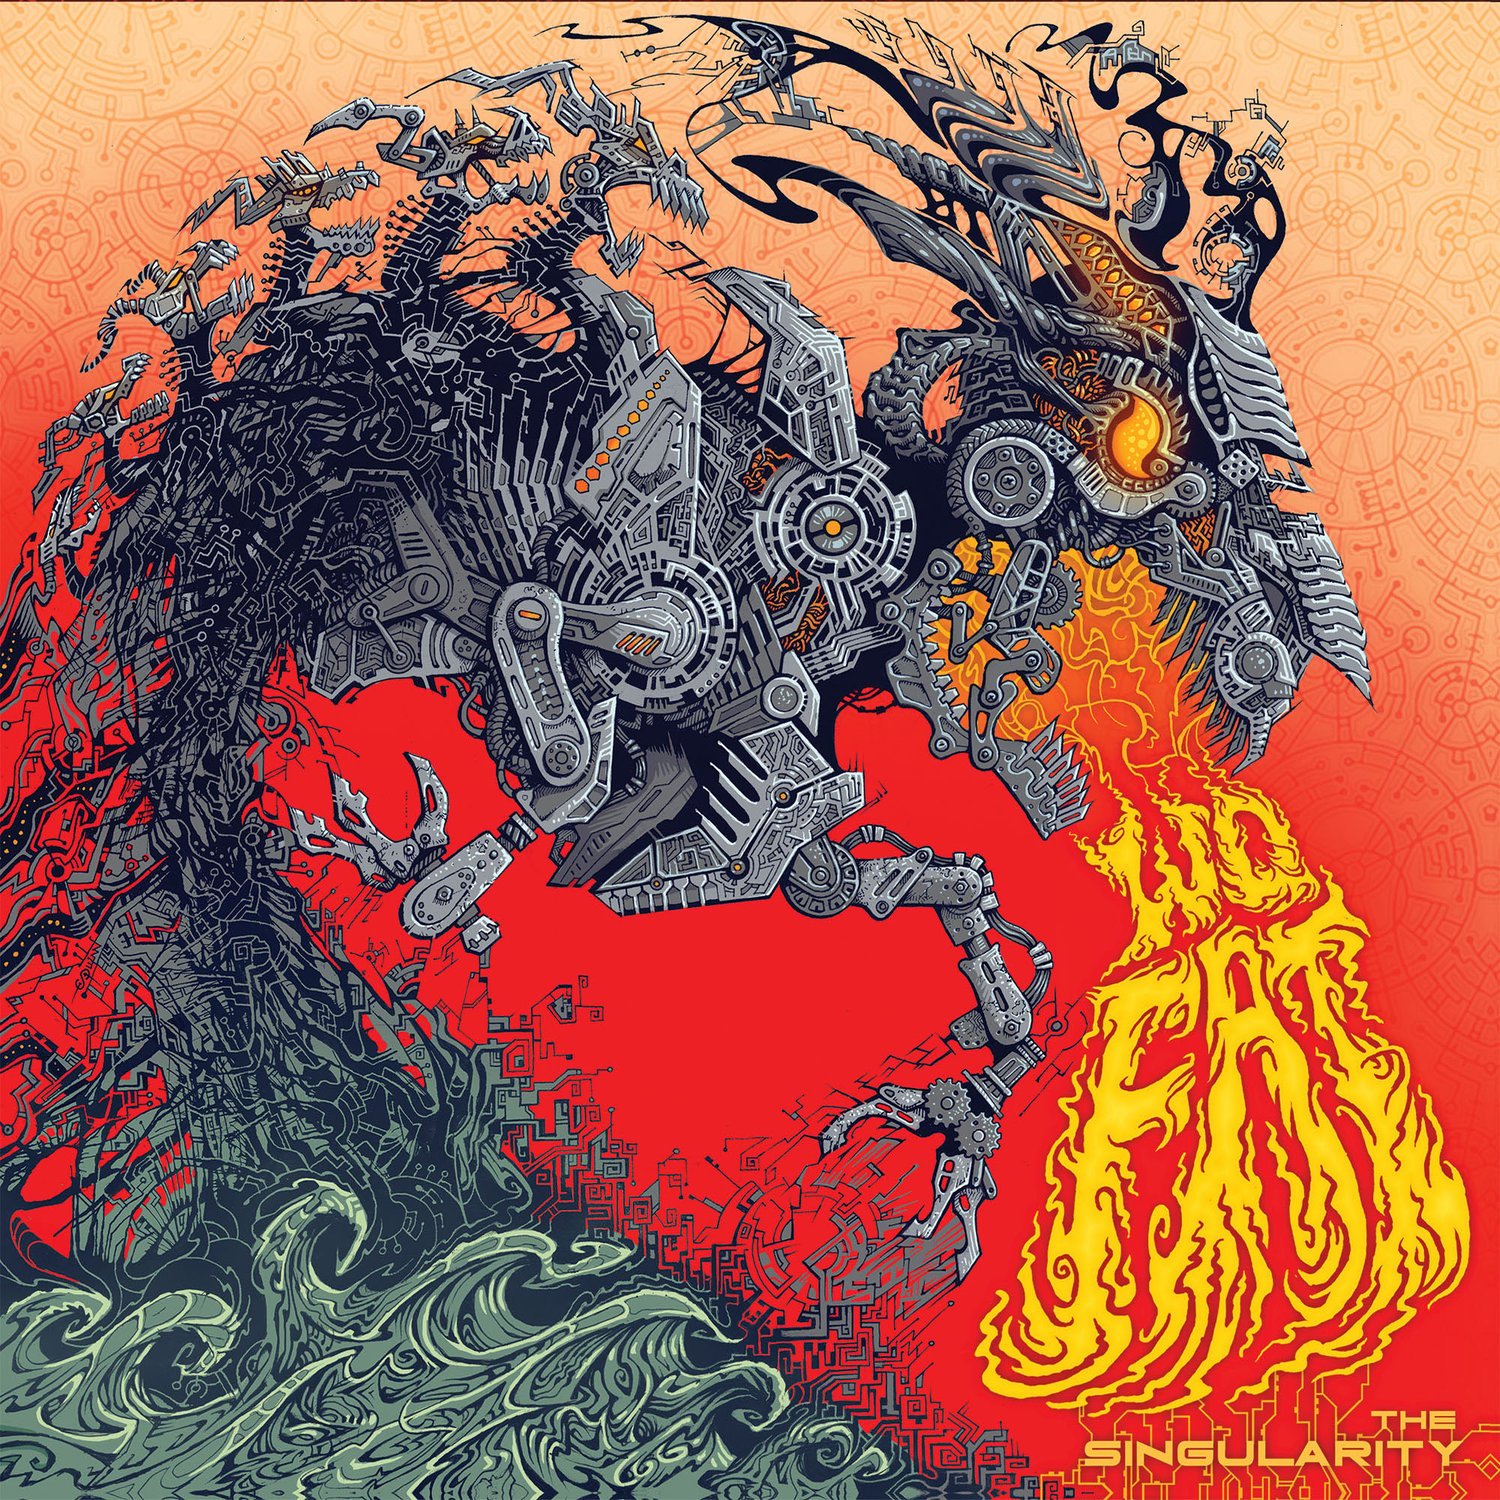 Image of Wo Fat - The Singularity Deluxe 2LP Vinyl Editions